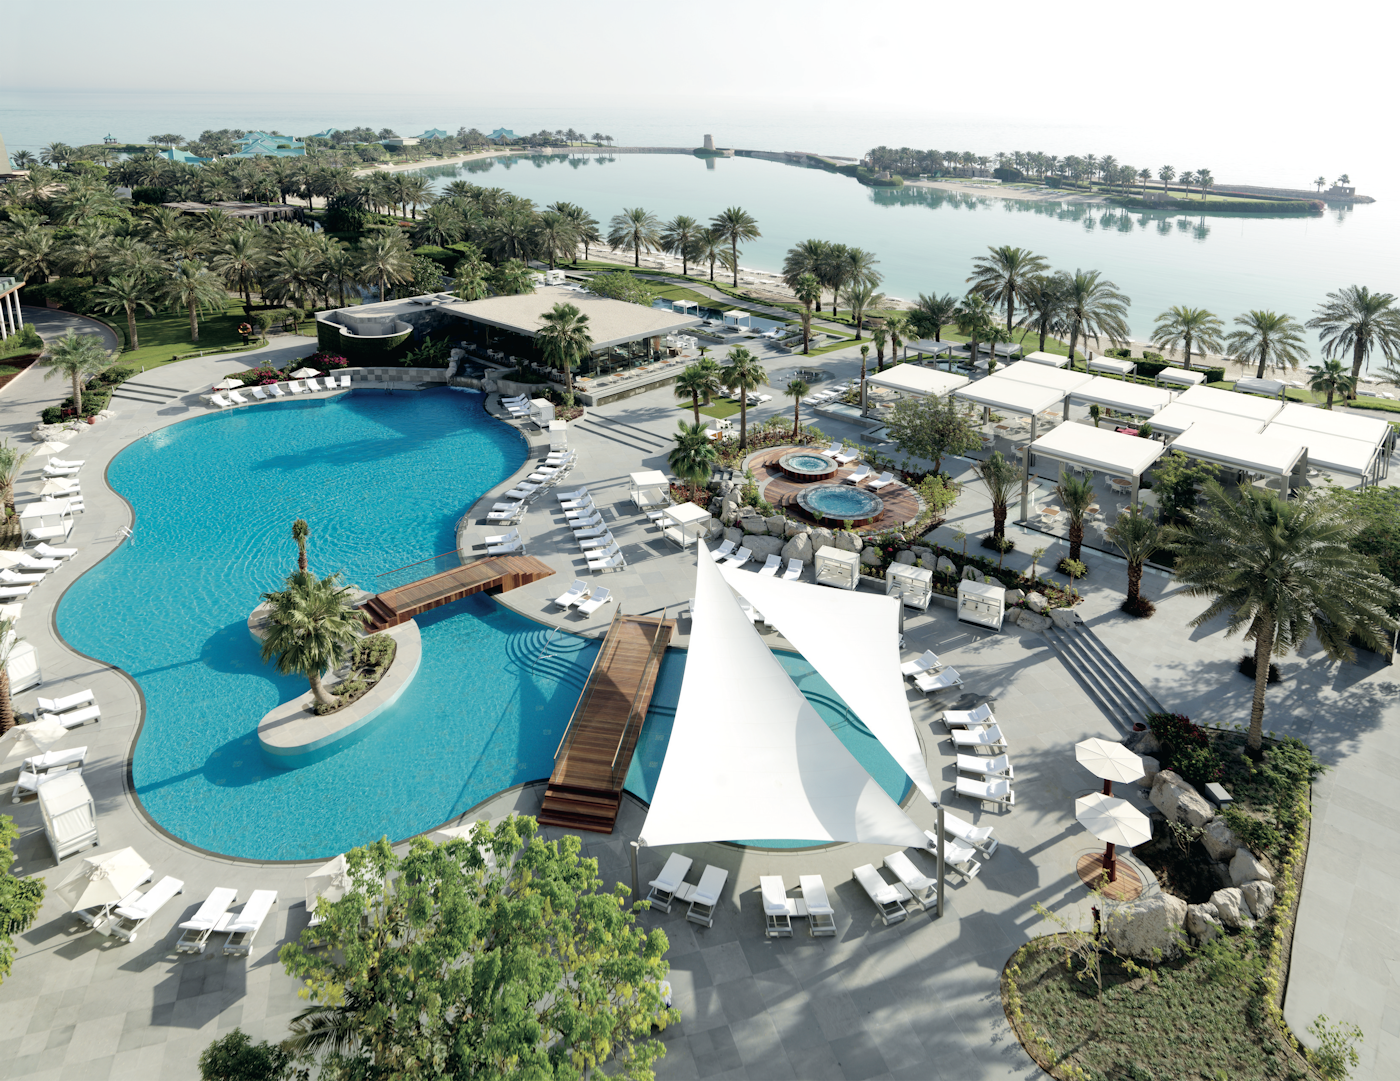 Ritz Carlton Hotel Outdoor Area In Bahrain With Pool And Greenery